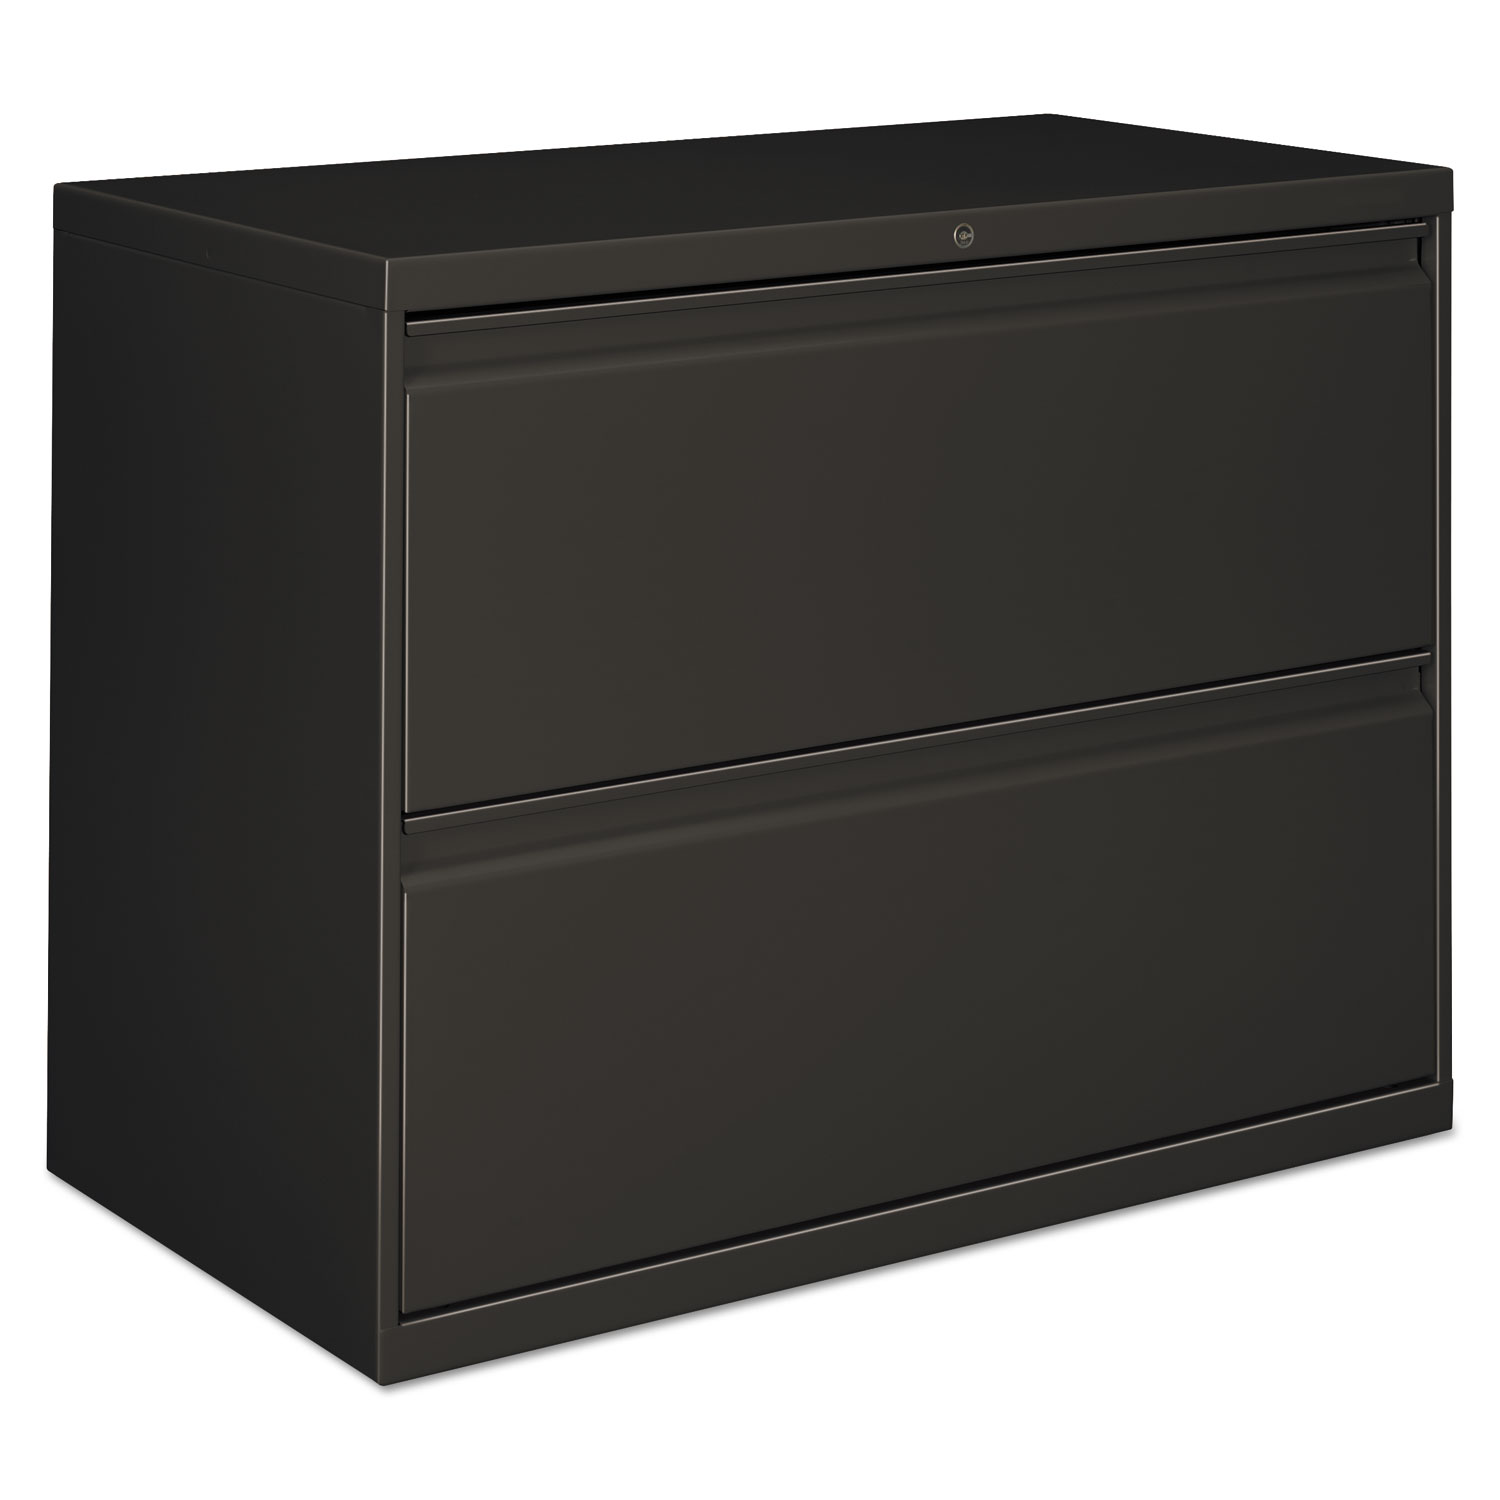 Two-Drawer Lateral File Cabinet, 36w x 18d x 28h, Charcoal